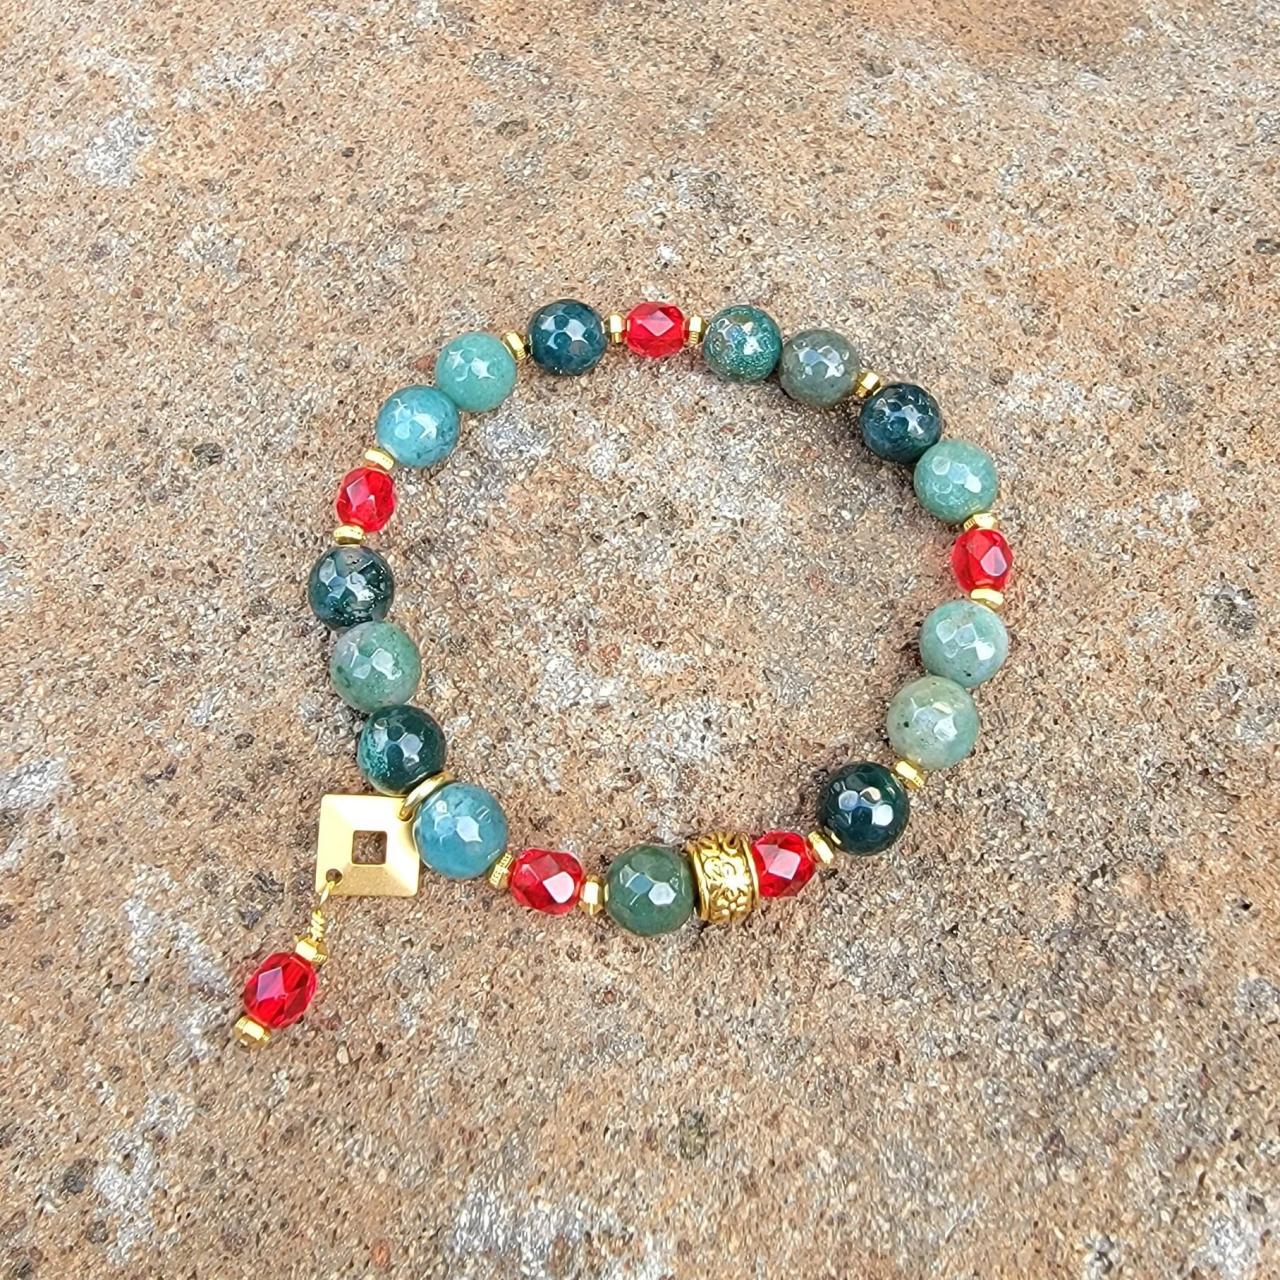 Green Moss Agate Natural Healing Gemstone Bracelet With Red Glass Beads